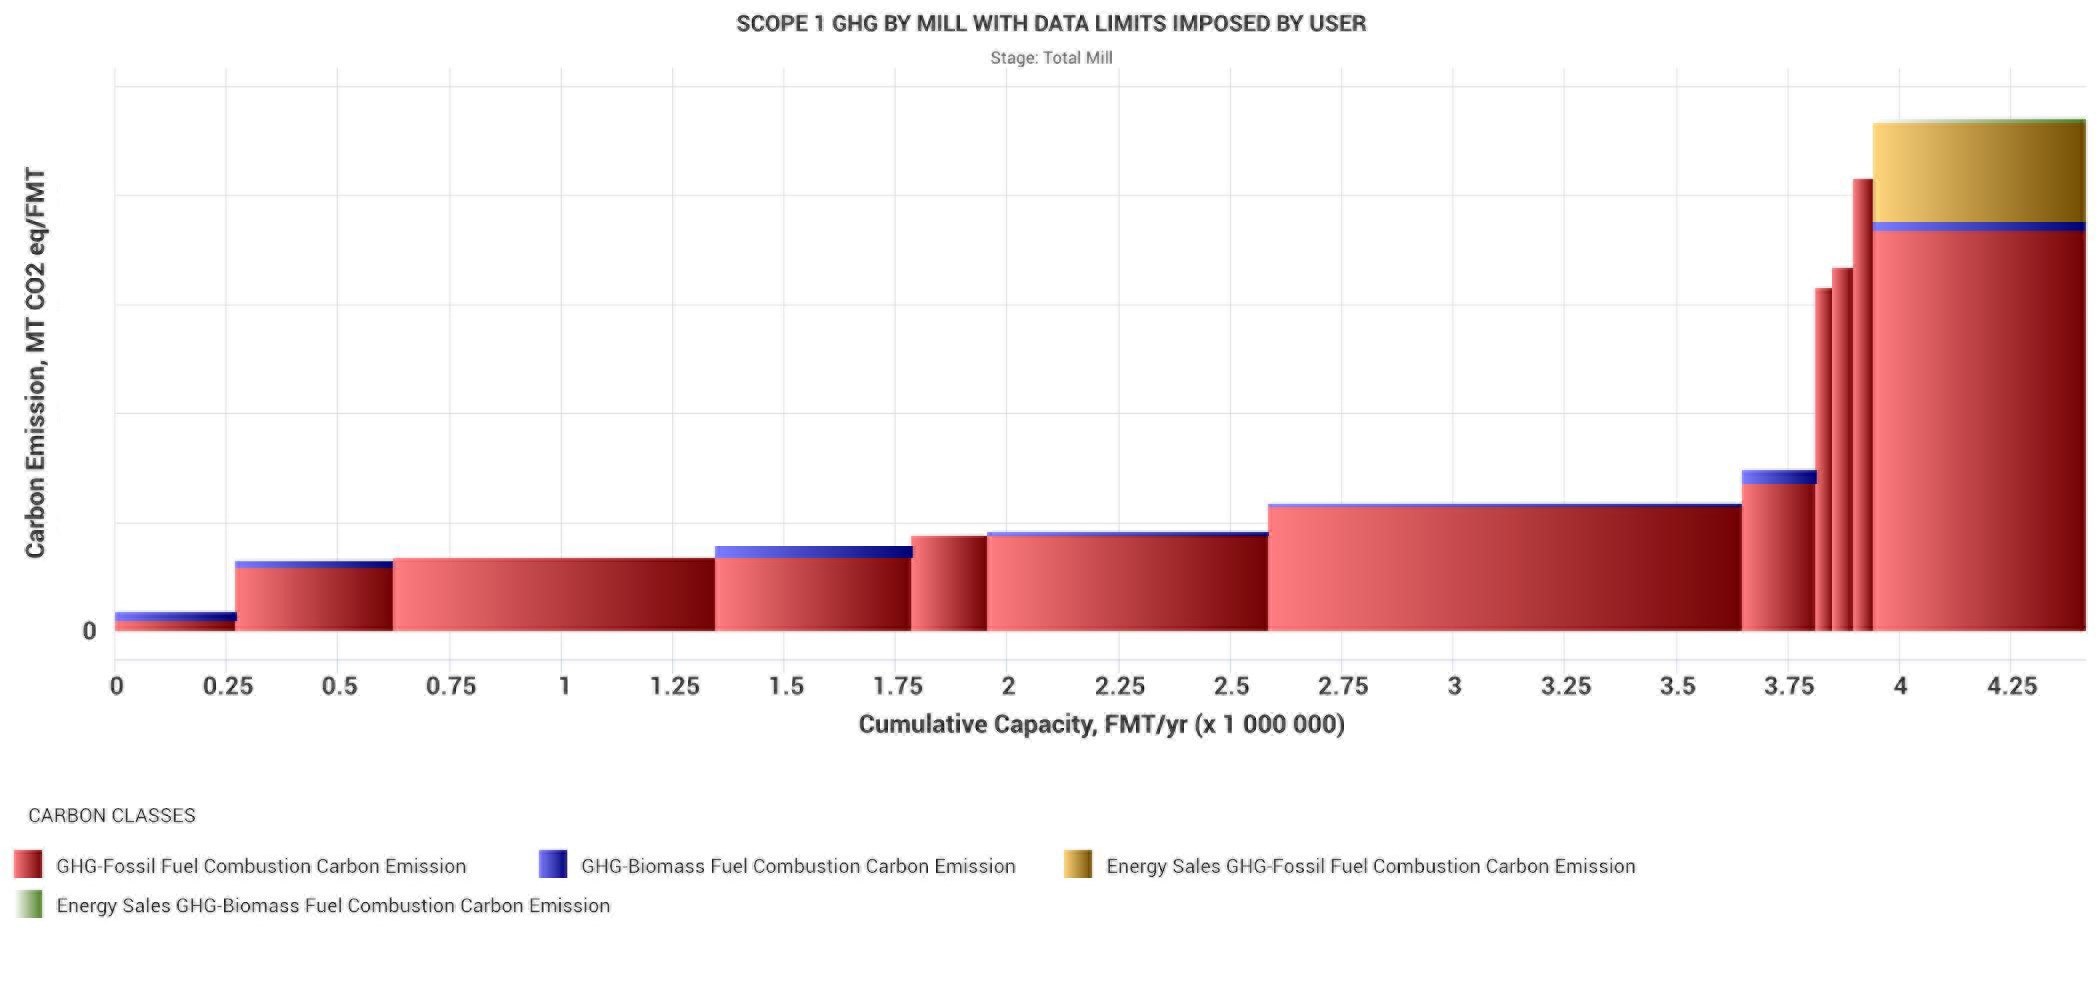 Image of scope 1 carbon emissions of pulp and paper mills in Washington.